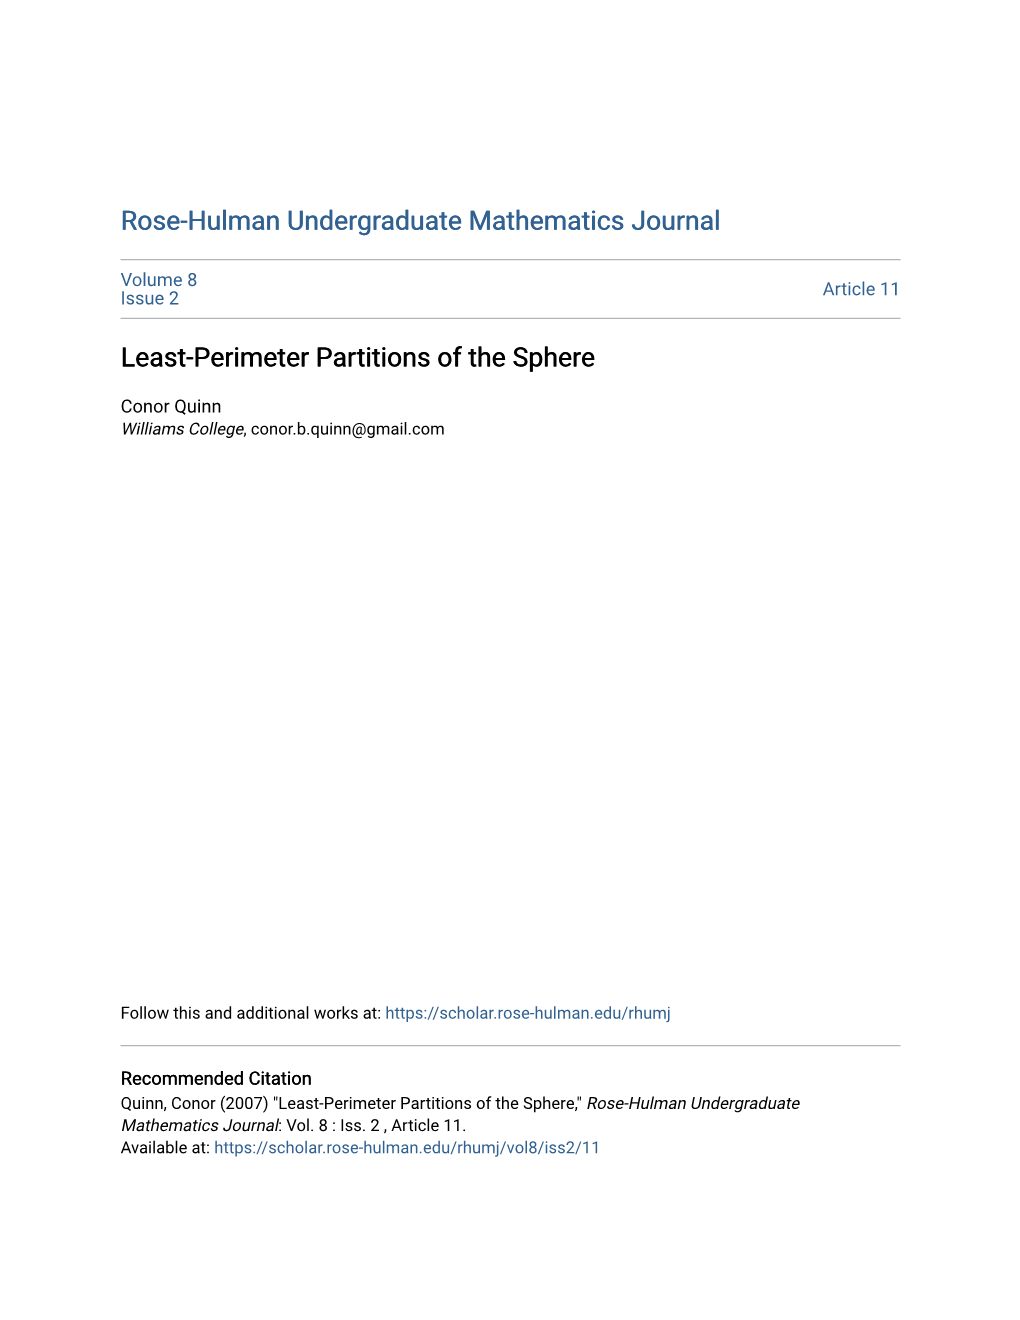 Least-Perimeter Partitions of the Sphere